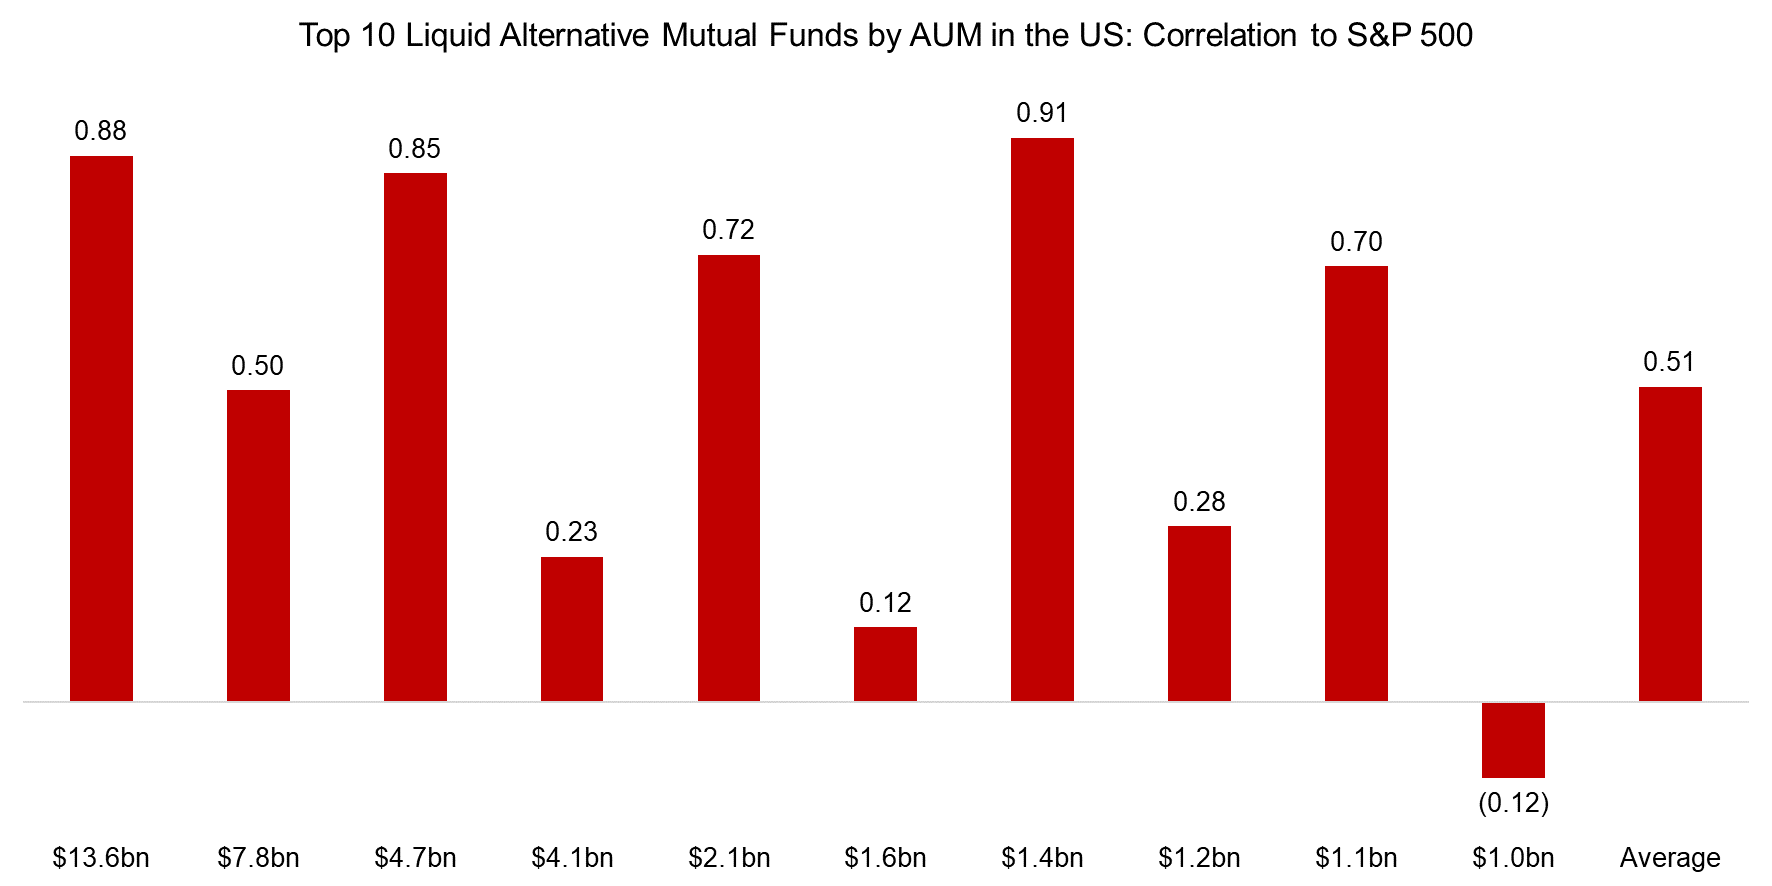 Top 10 Liquid Alternative Mutual Funds by AUM in the US Correlation to S&P 500